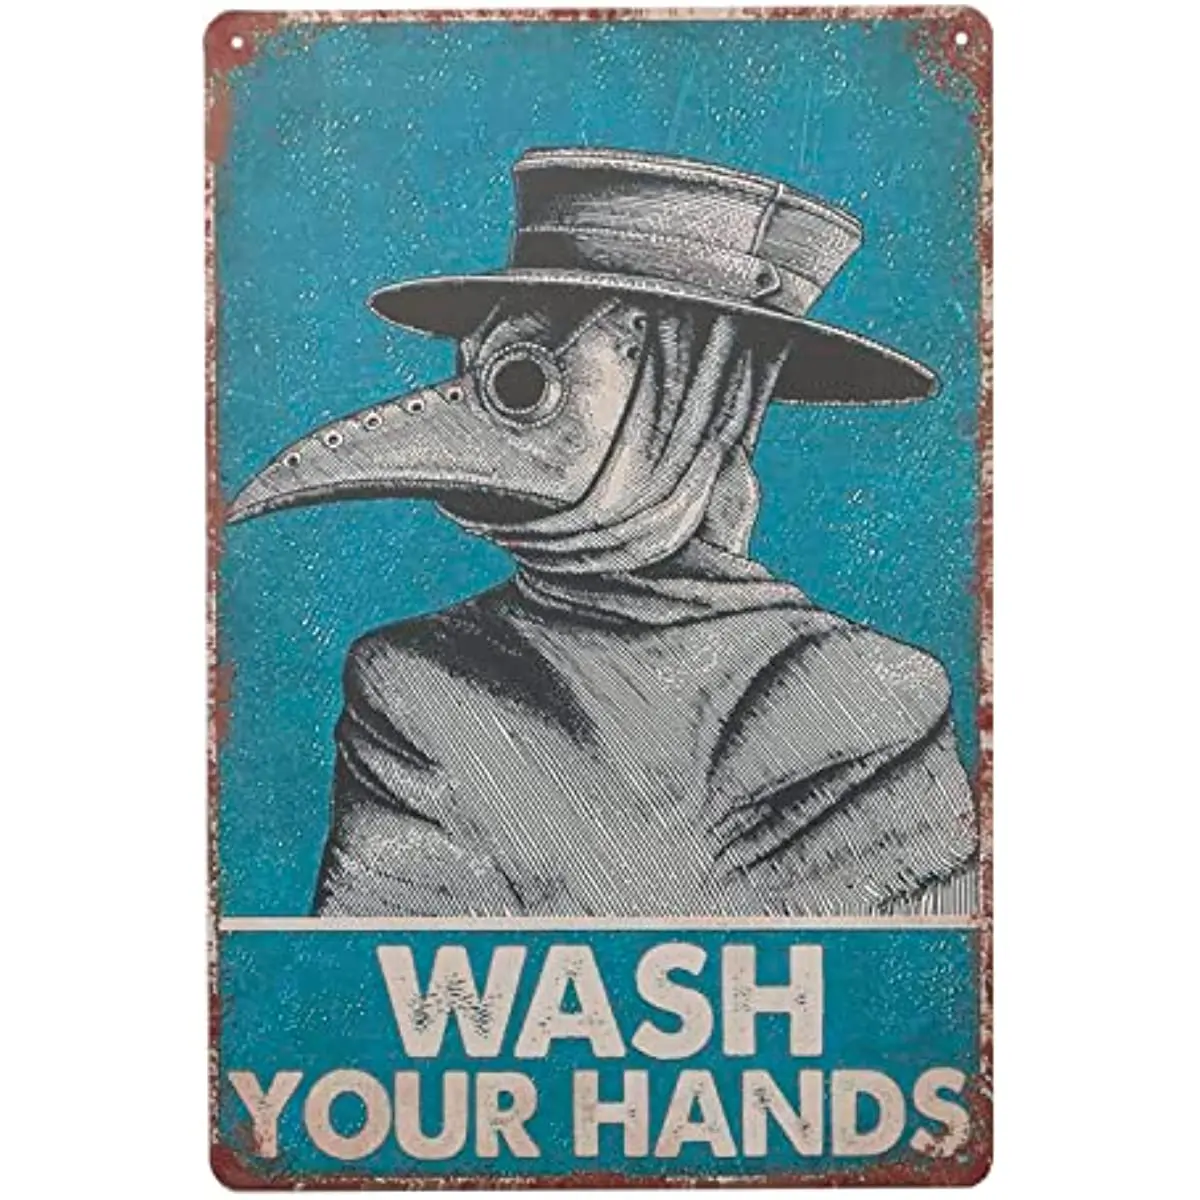 

Vintage Tin Sign Wash Your Hand Plague Doctor Wall Art Plague Doctor Art Print Plague Doctor Wall DecorHome Decor 12x16 Inch